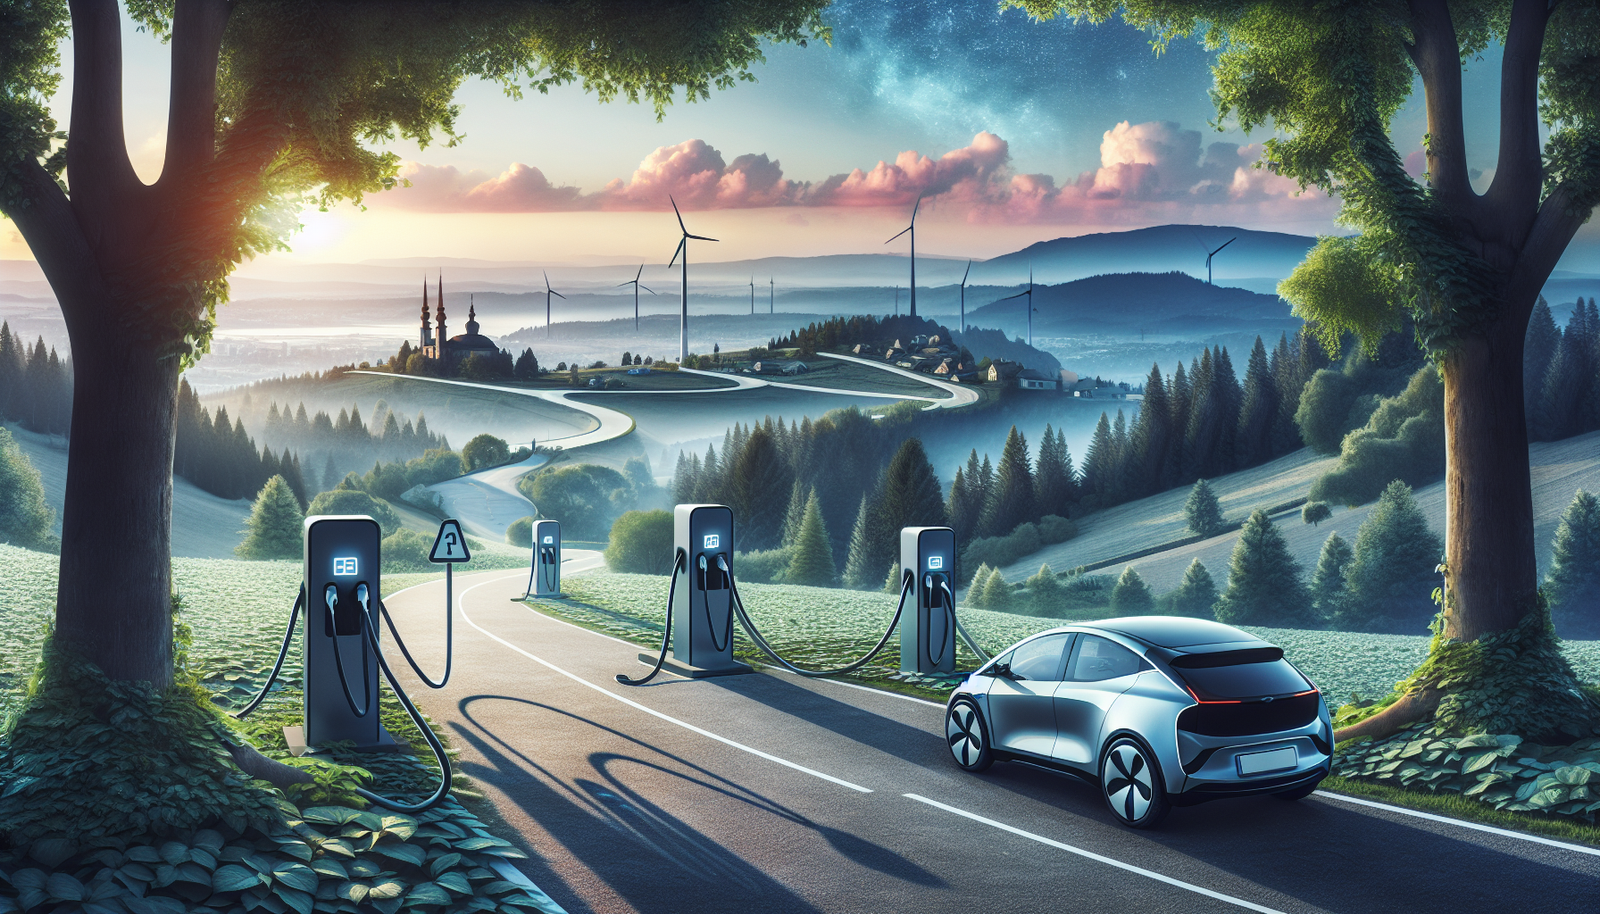 What Are The Best EV-friendly Destinations For Travelers Looking To Explore With Ease?